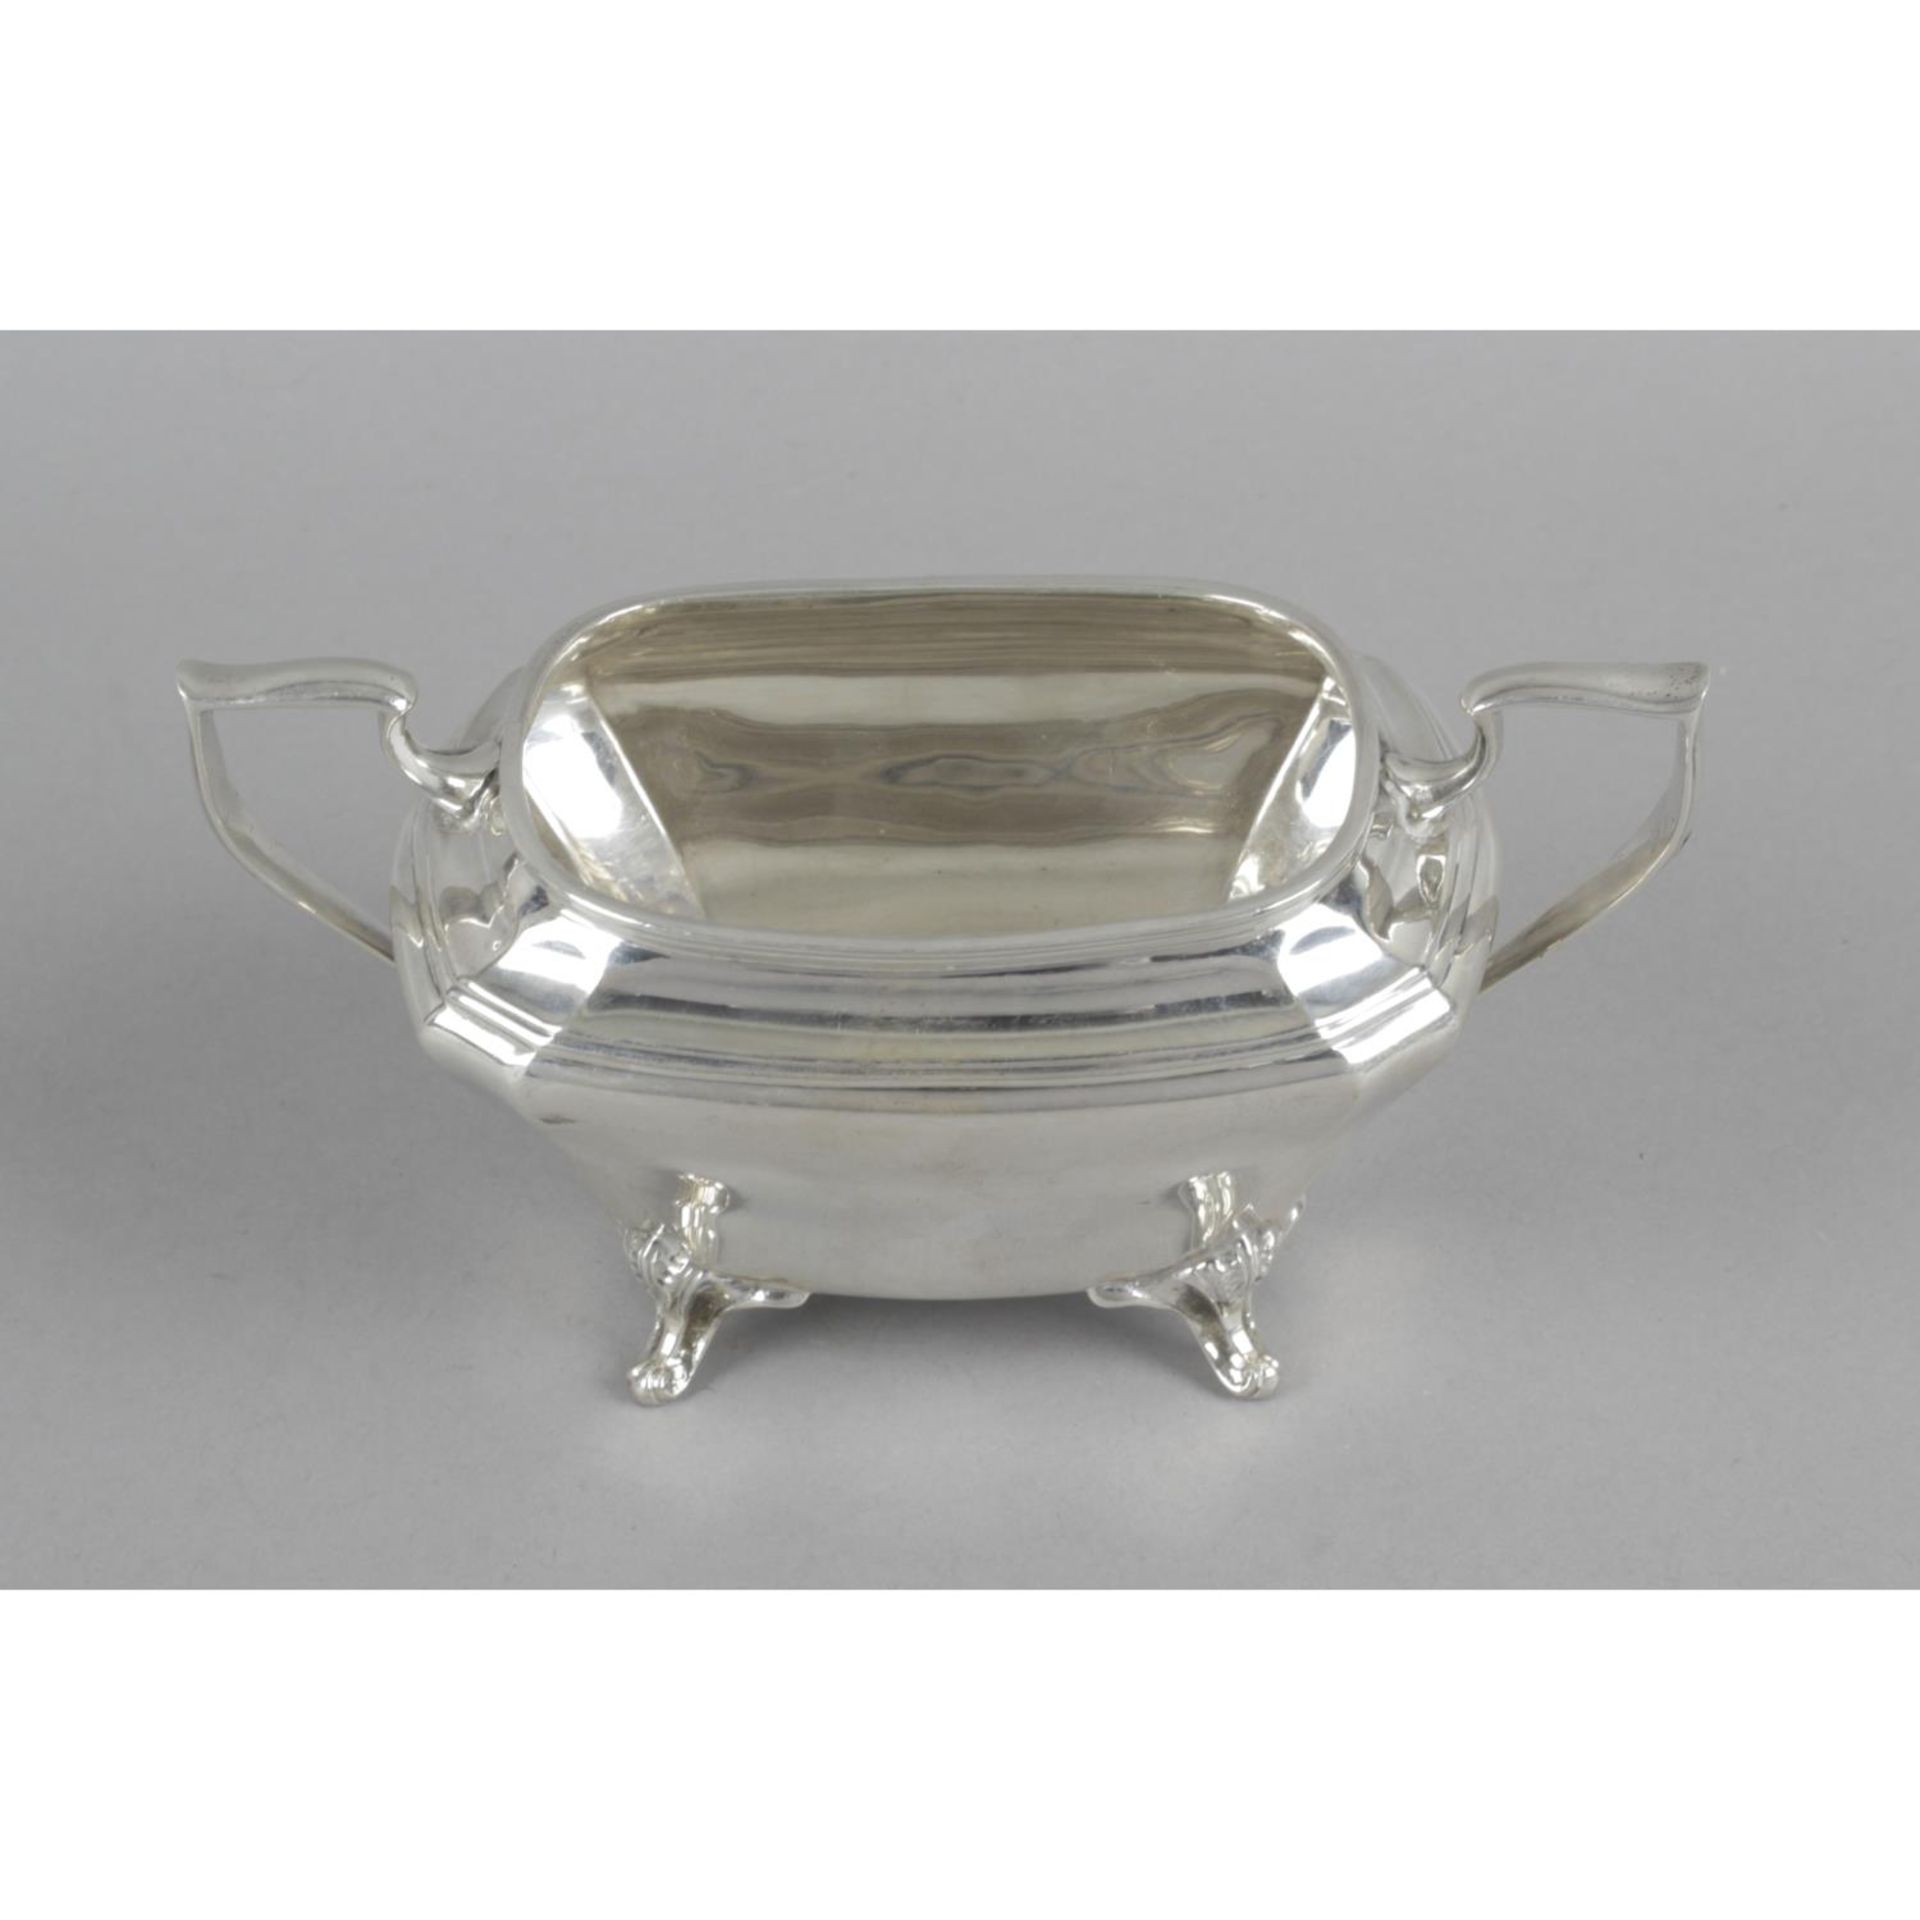 An early George V silver cream jug, - Image 4 of 5